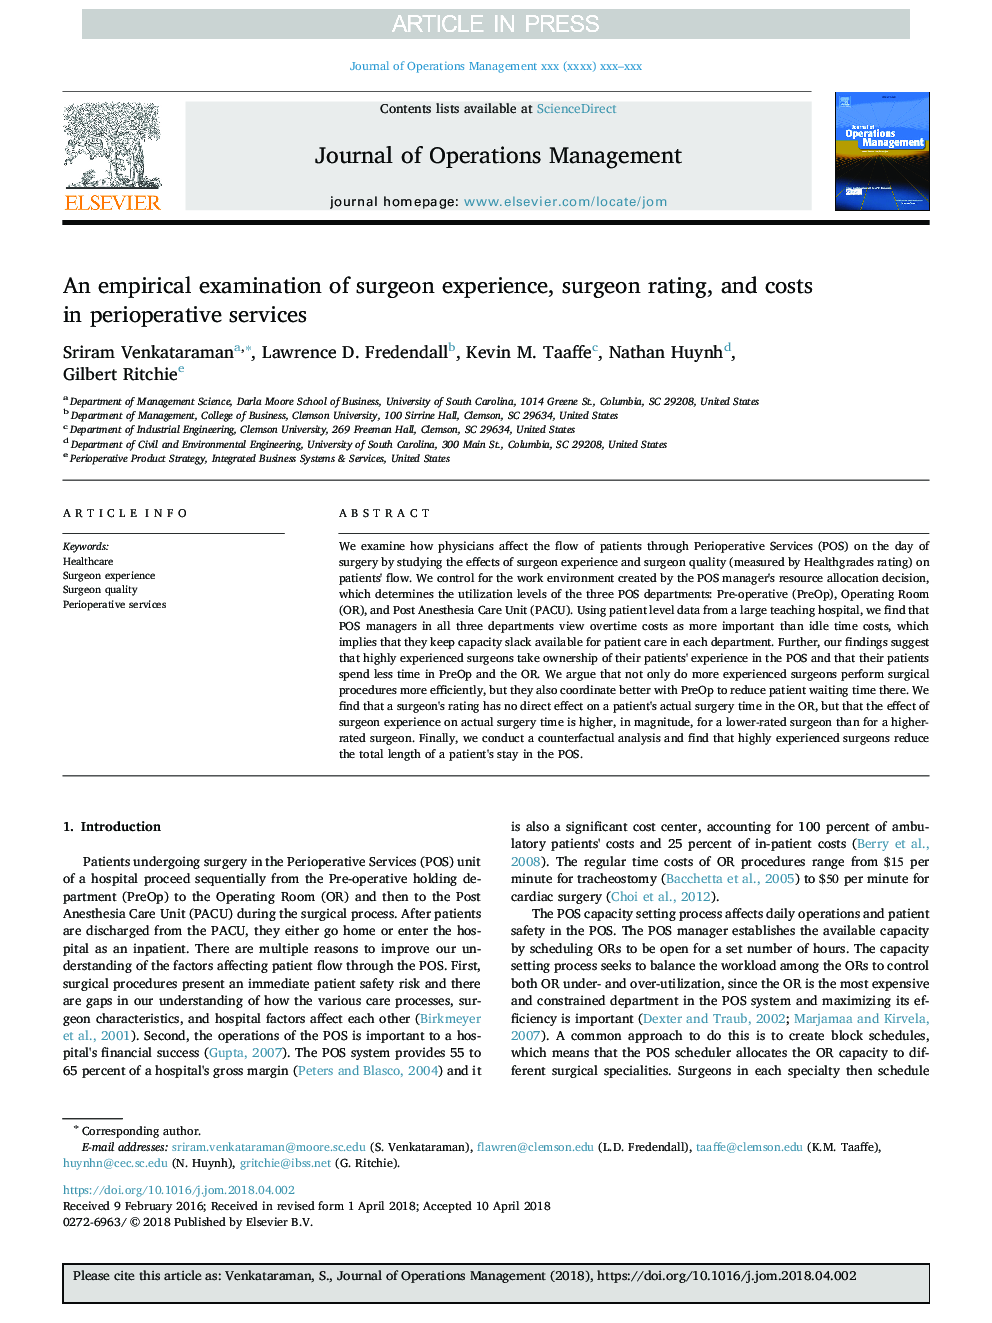 An empirical examination of surgeon experience, surgeon rating, and costs in perioperative services